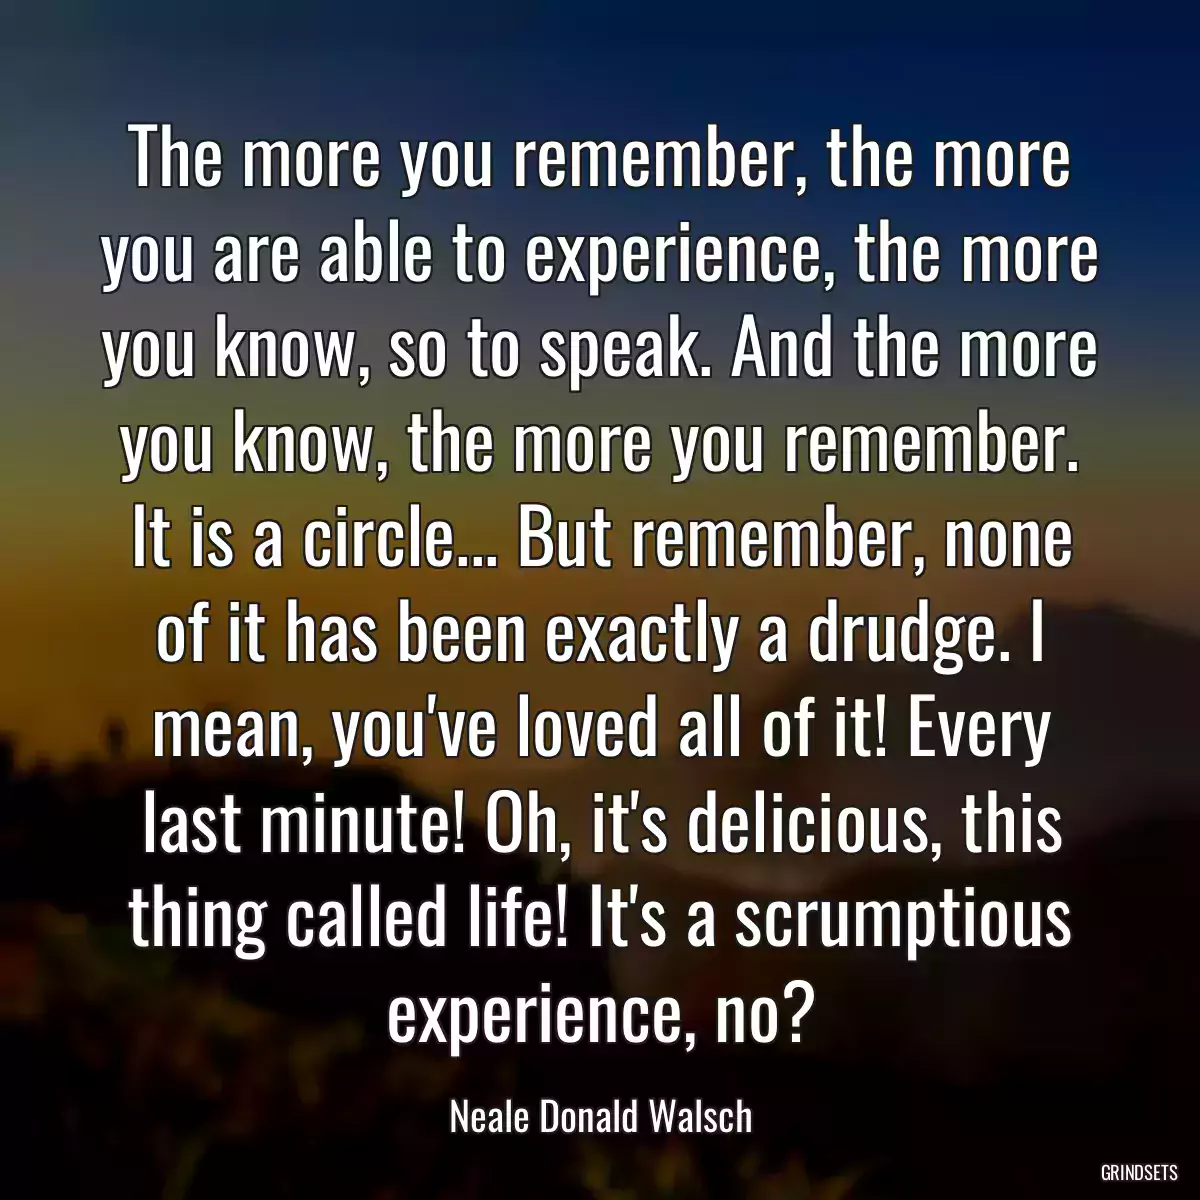 The more you remember, the more you are able to experience, the more you know, so to speak. And the more you know, the more you remember. It is a circle... But remember, none of it has been exactly a drudge. I mean, you\'ve loved all of it! Every last minute! Oh, it\'s delicious, this thing called life! It\'s a scrumptious experience, no?